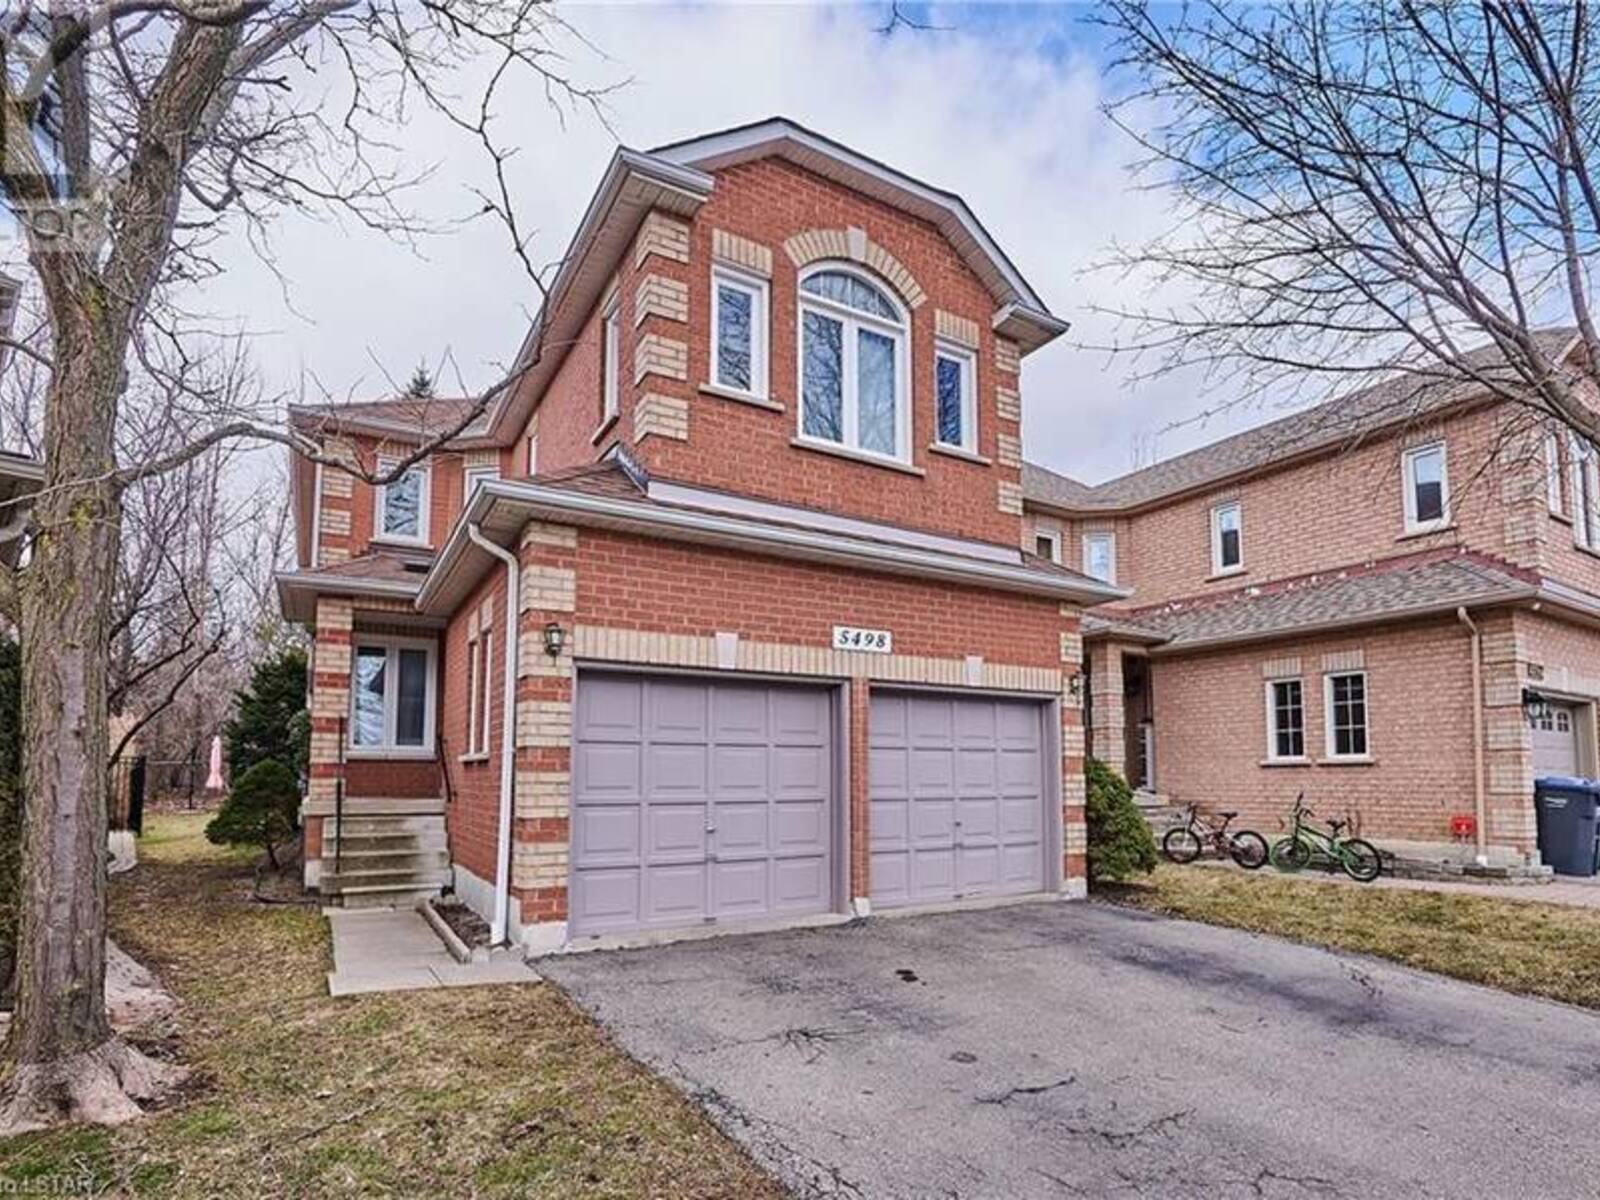 5498 RED BRUSH Drive, Mississauga, Ontario L4Z 4A7